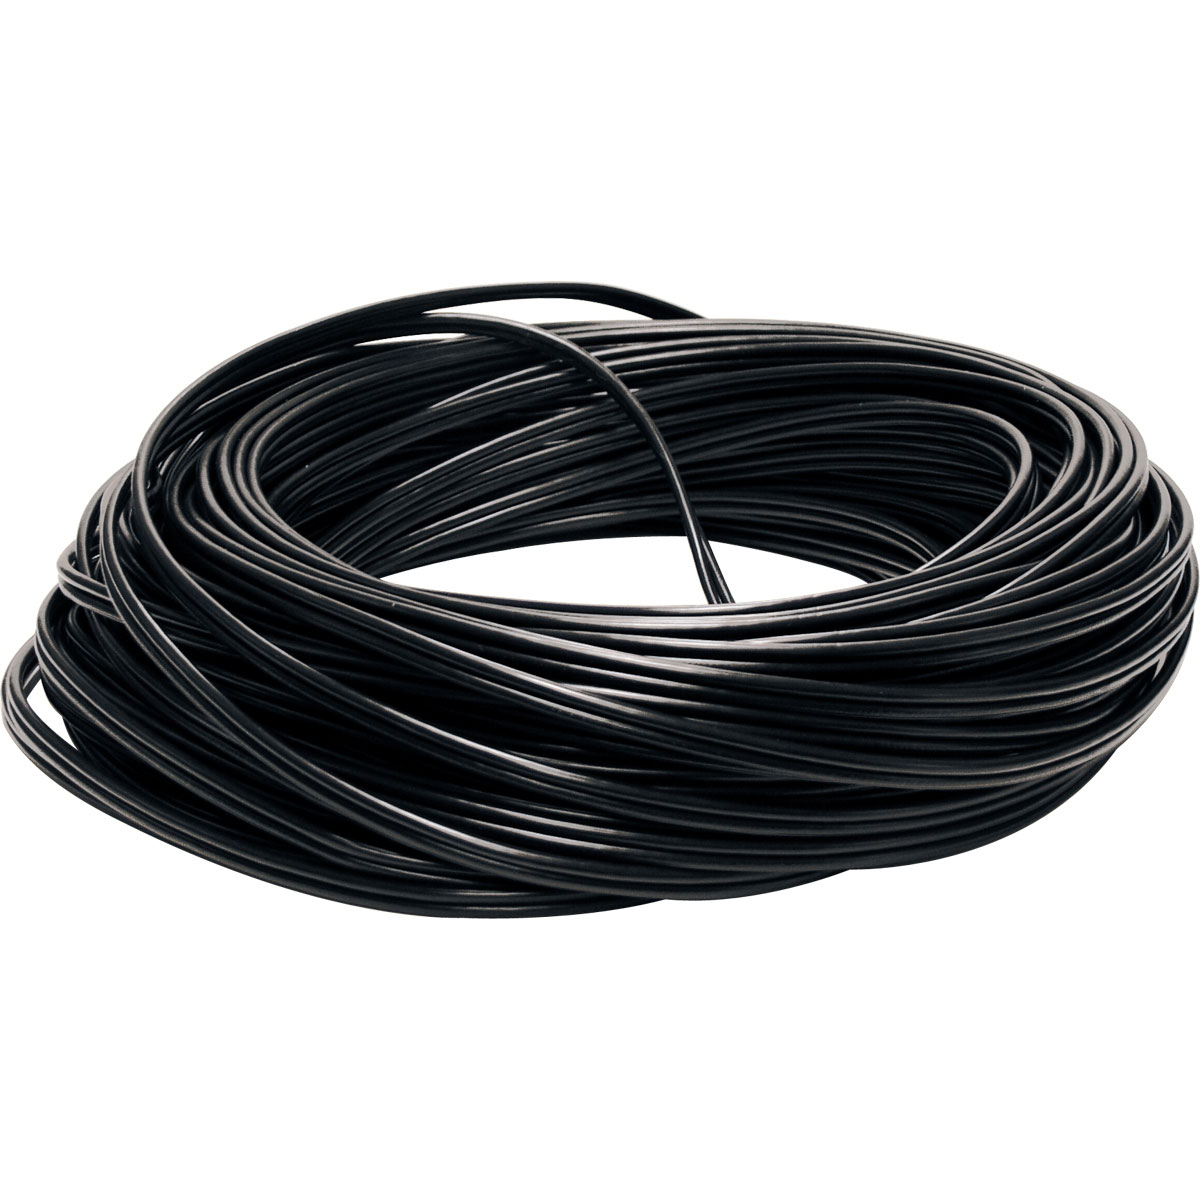 100 feet of 12-Volt Cable. UV protected and perfect pit for fixture connectors for easy installation. Recommended for use with P8270-31 transformer and LED Lighting.